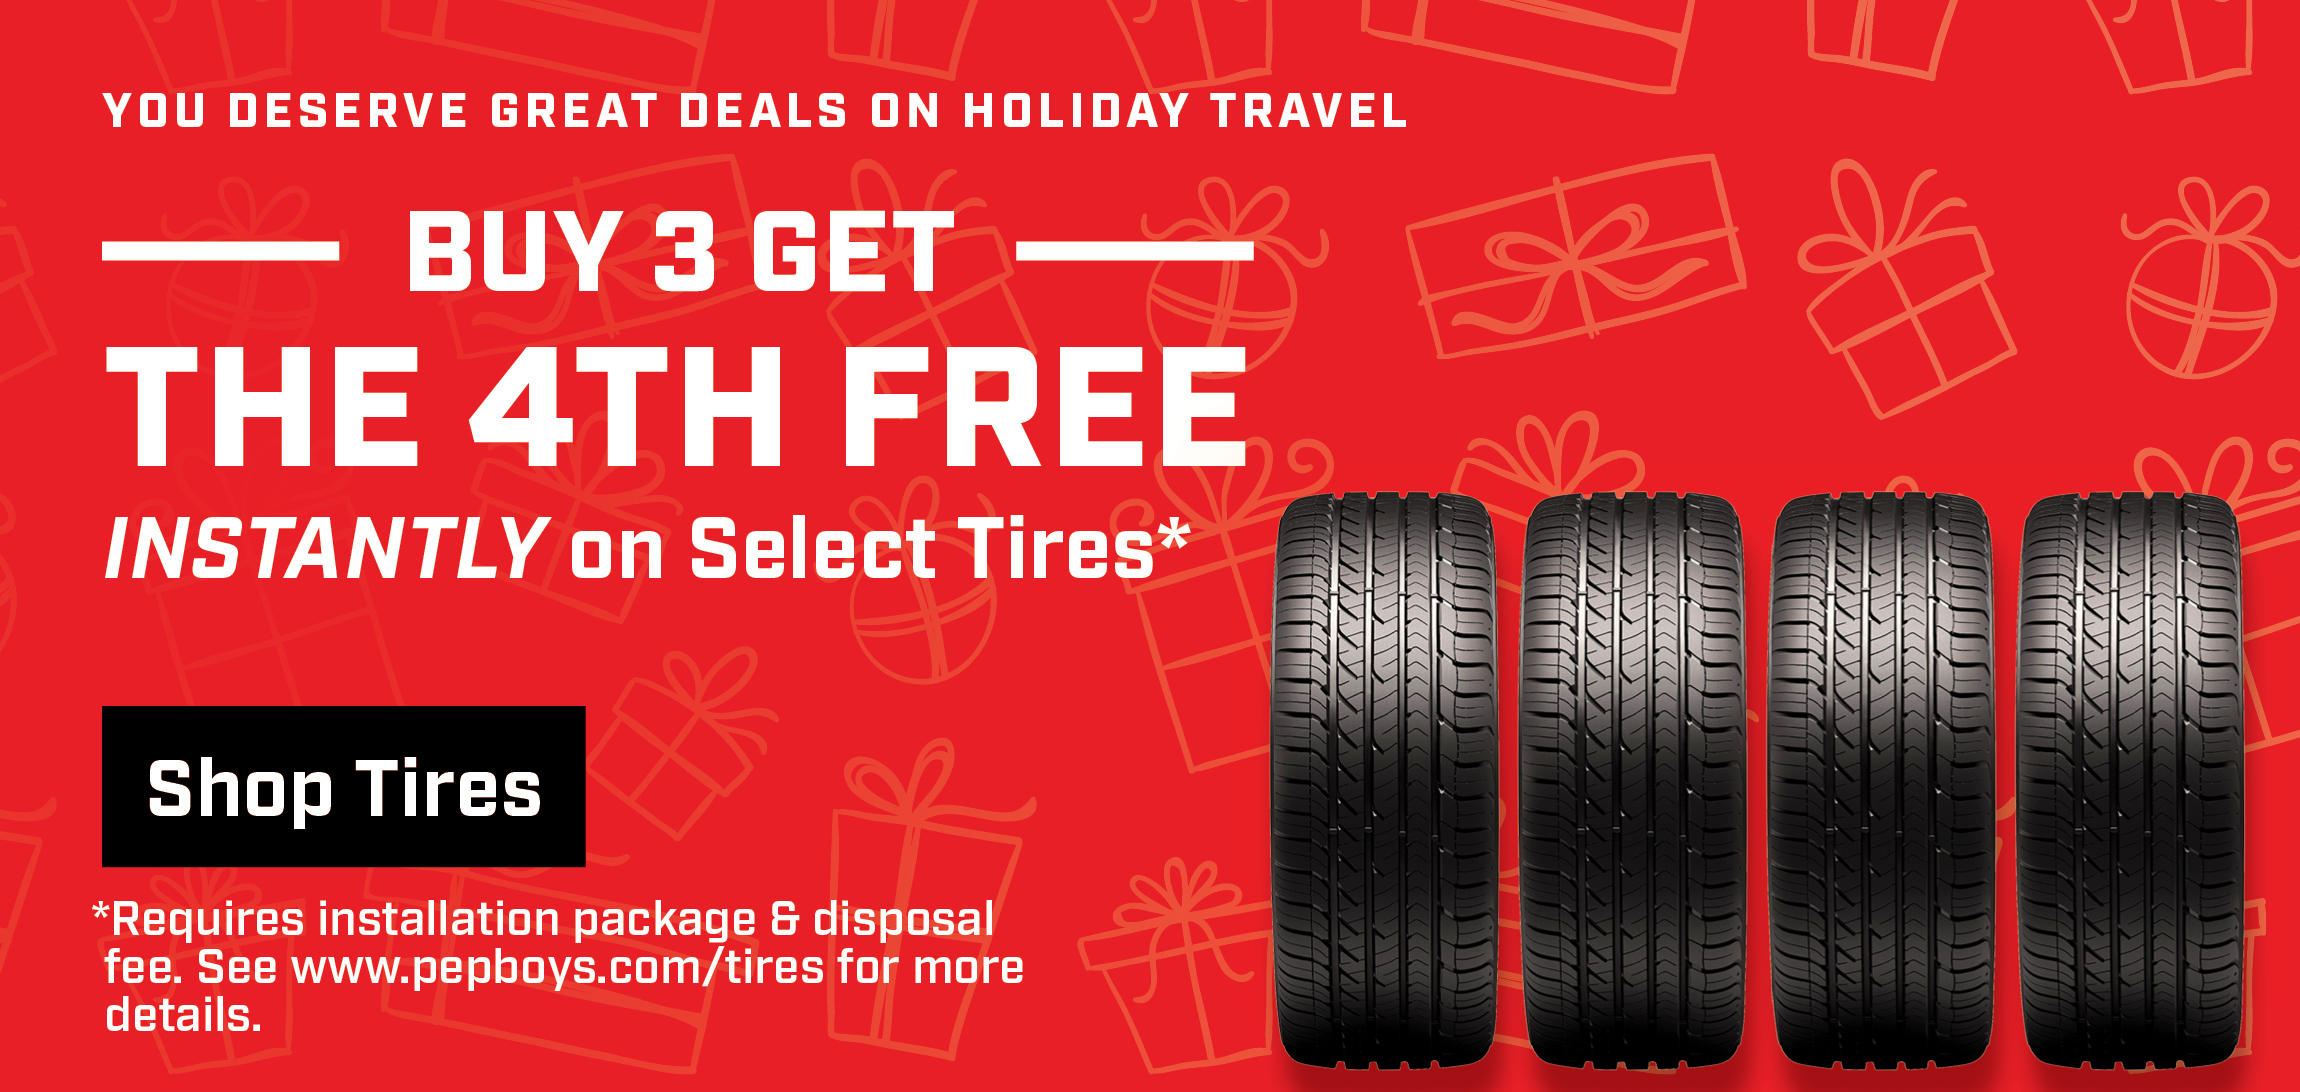 Save on Tires at Pep Boys